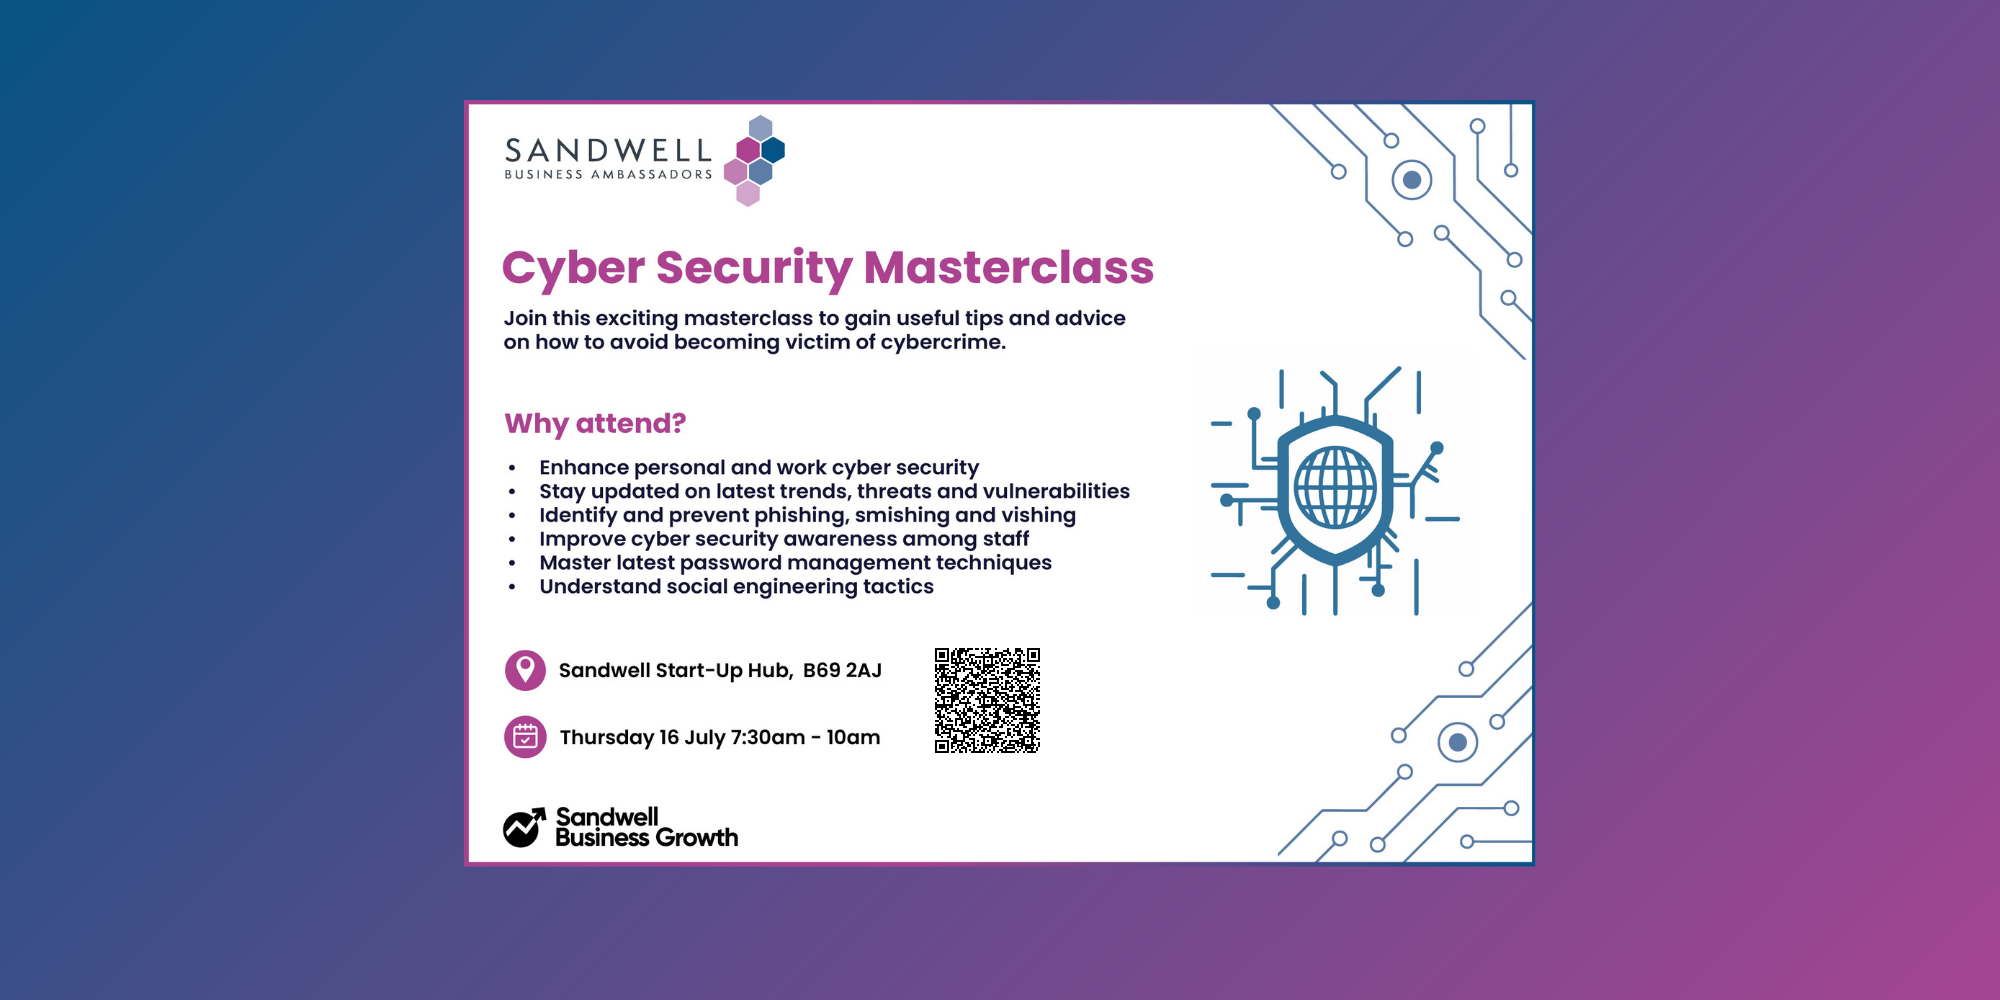 Cyber Security Masterclass with Sandwell Business Ambassadors